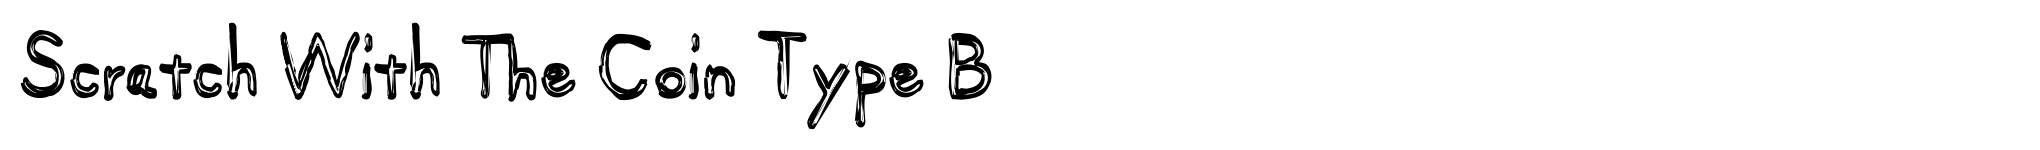 Scratch With The Coin Type B image